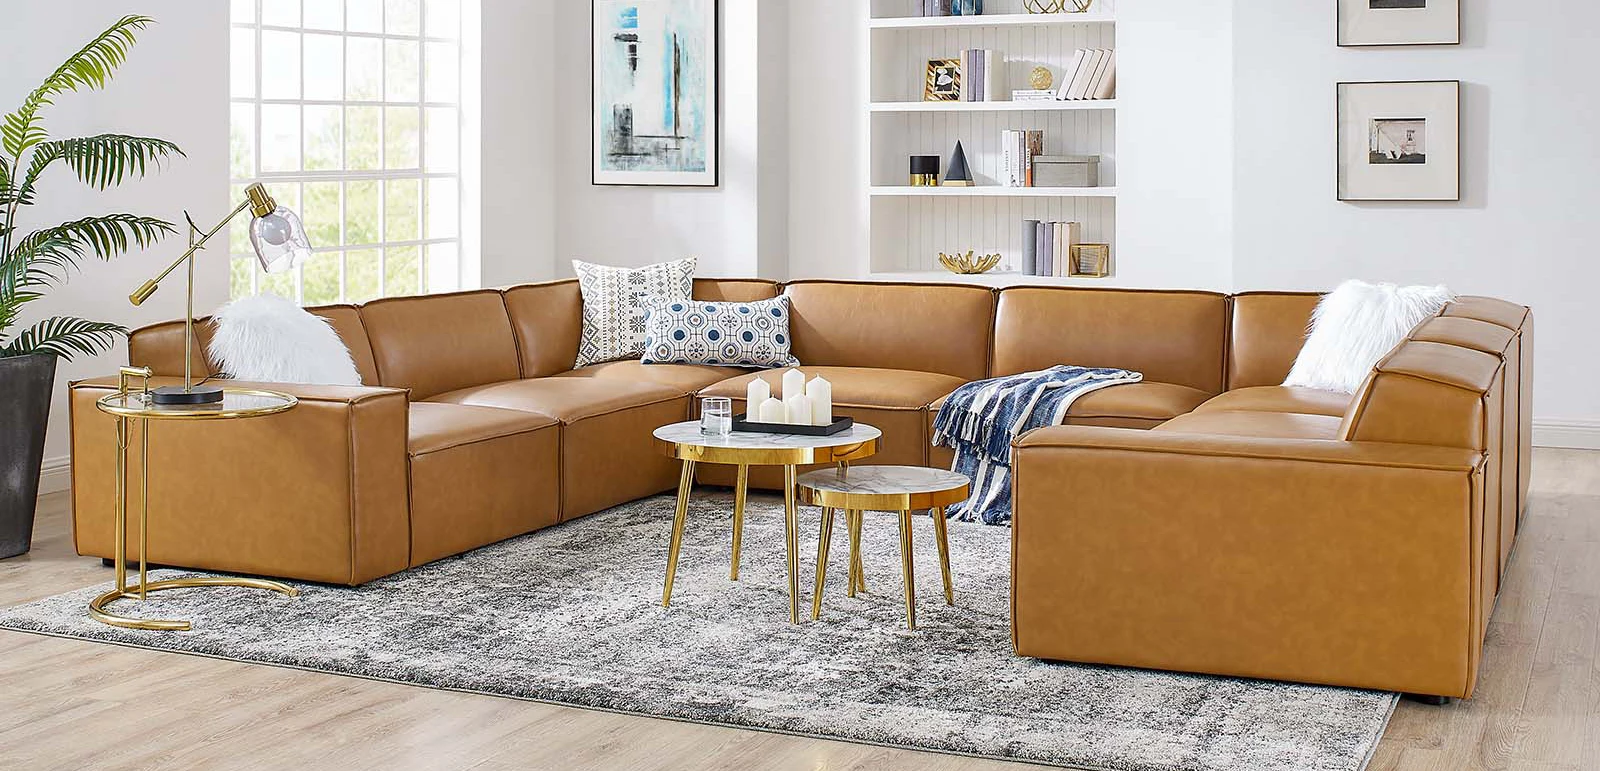 Restore Sectional Floating in Room